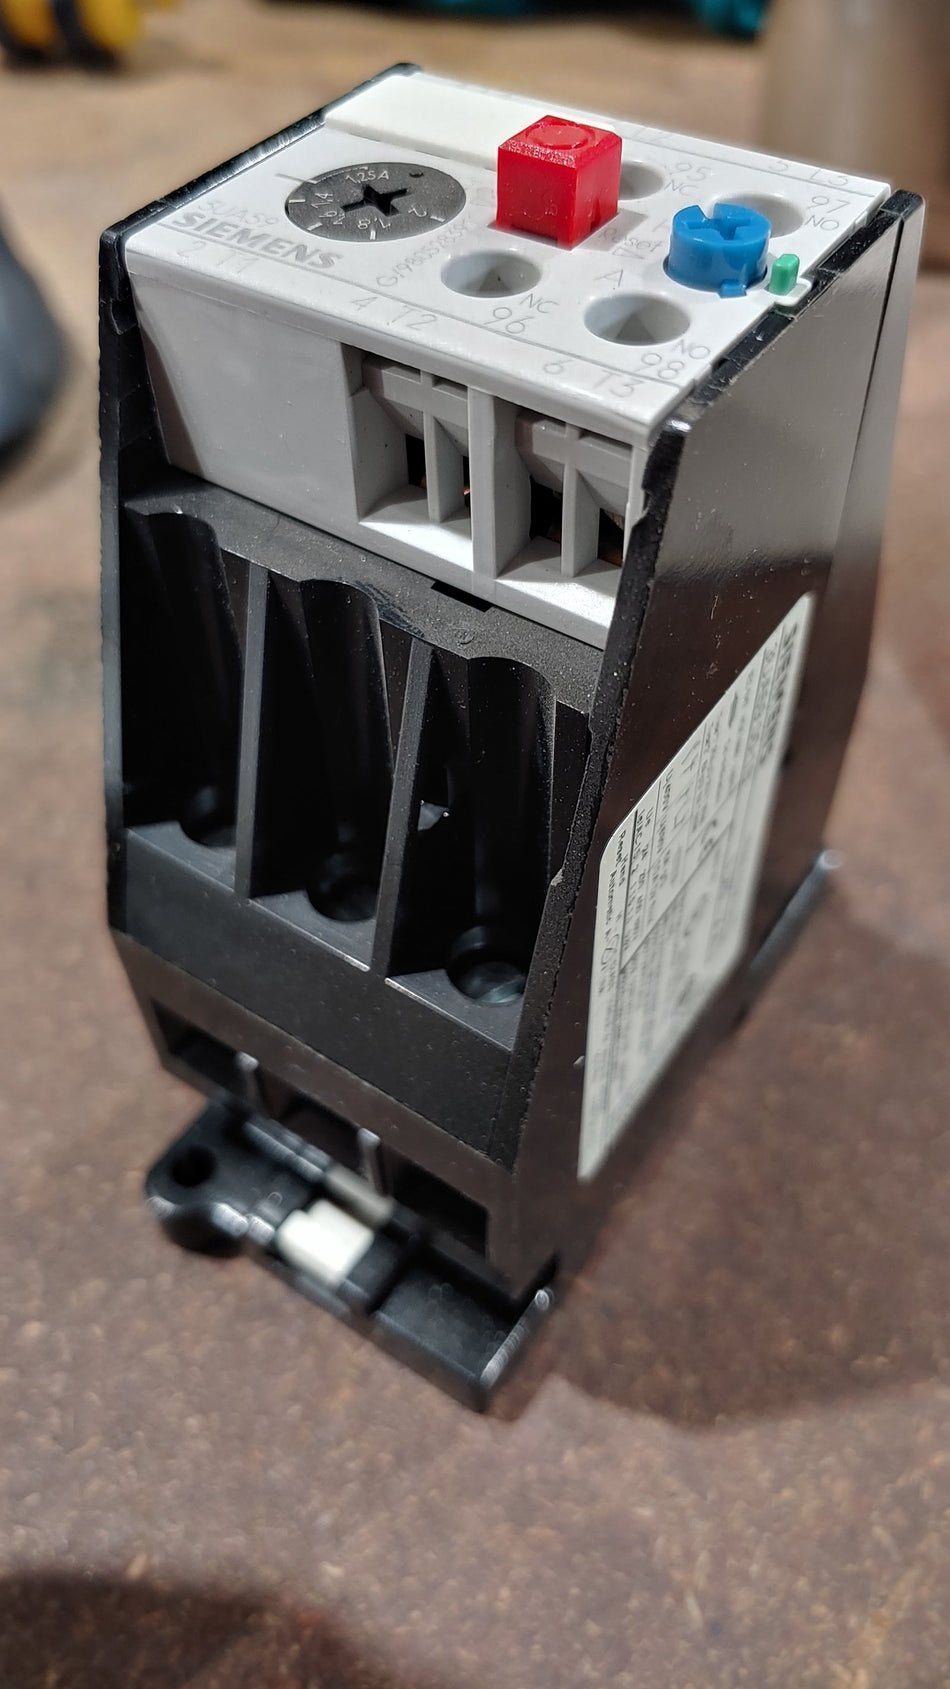 3UA59-00-1B Siemens, overload relay rated for 1.25-2 amps